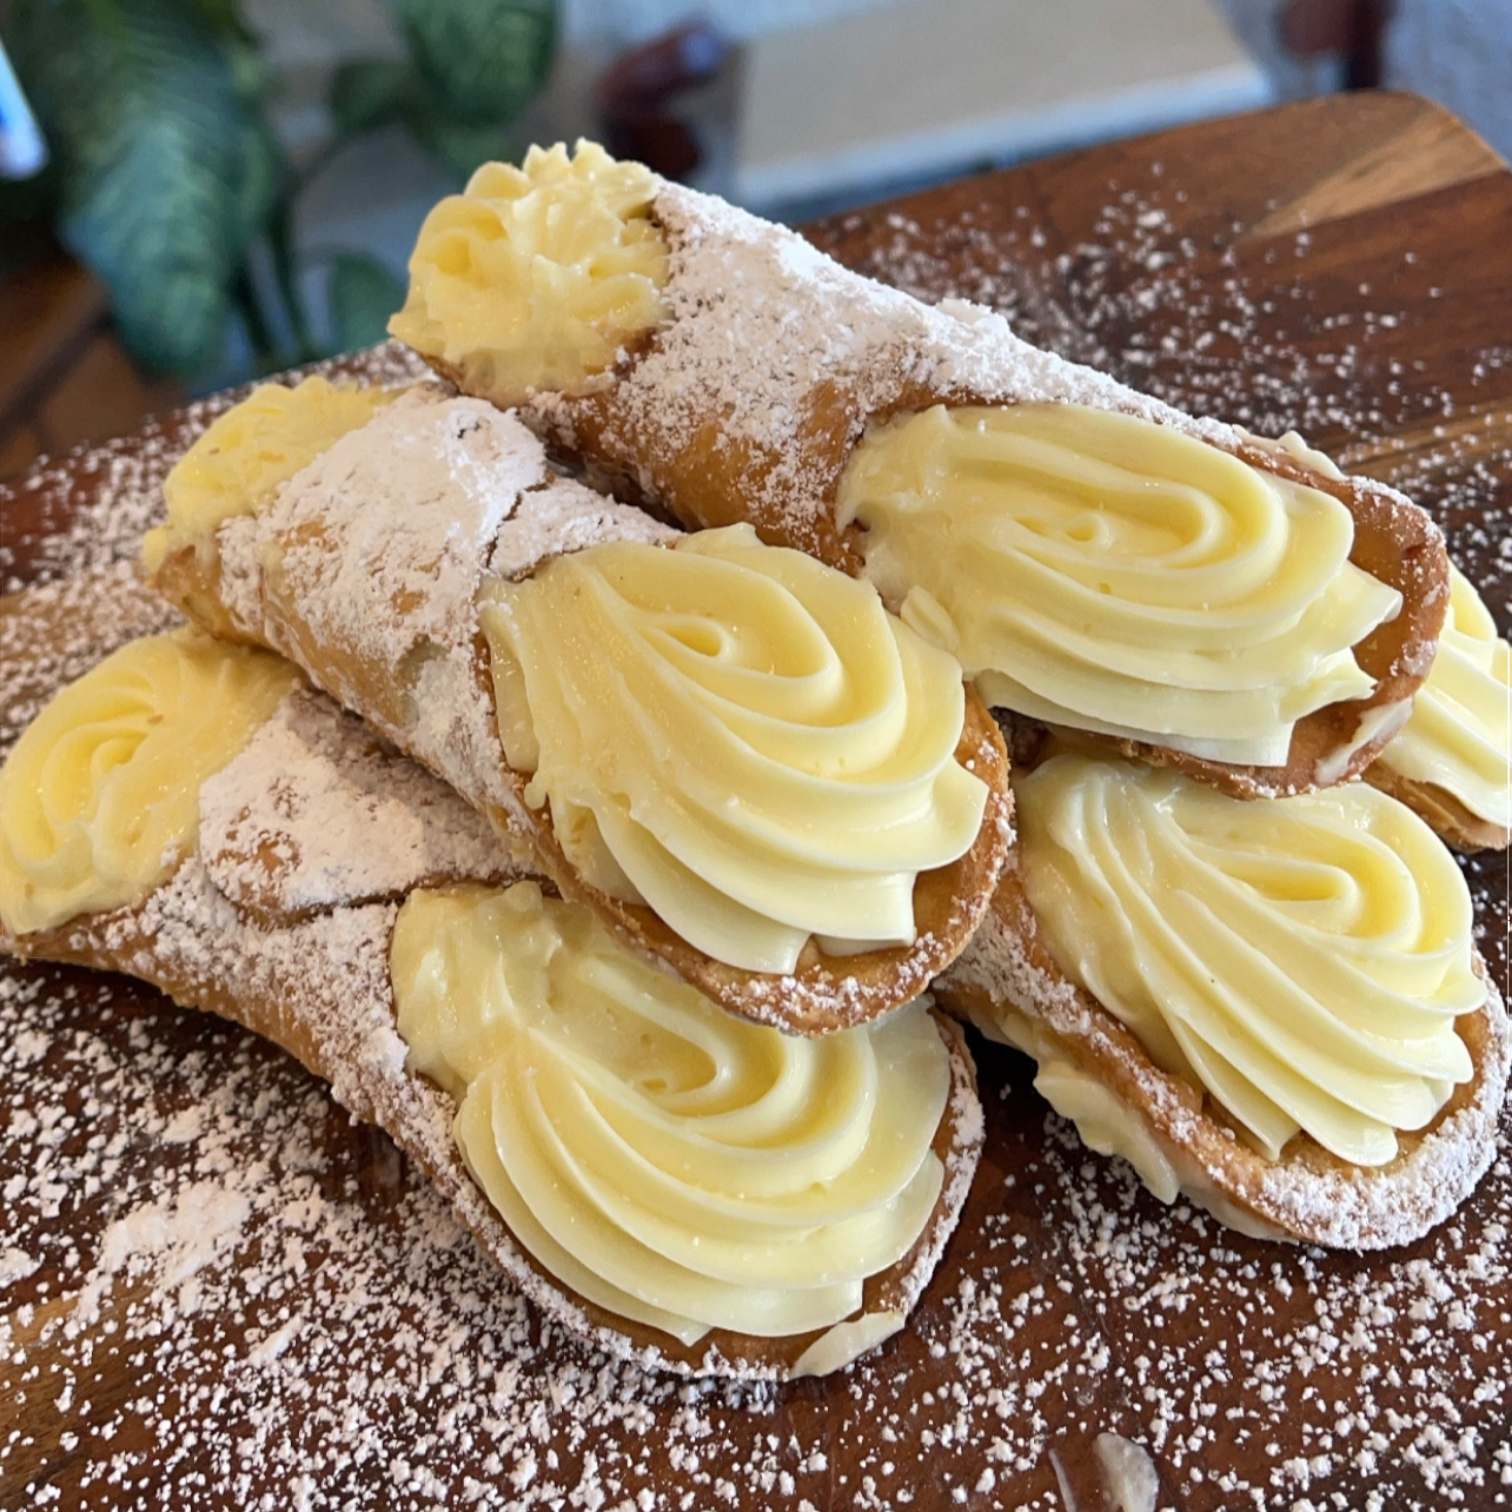 Plate of Italian cannoli in different flavours